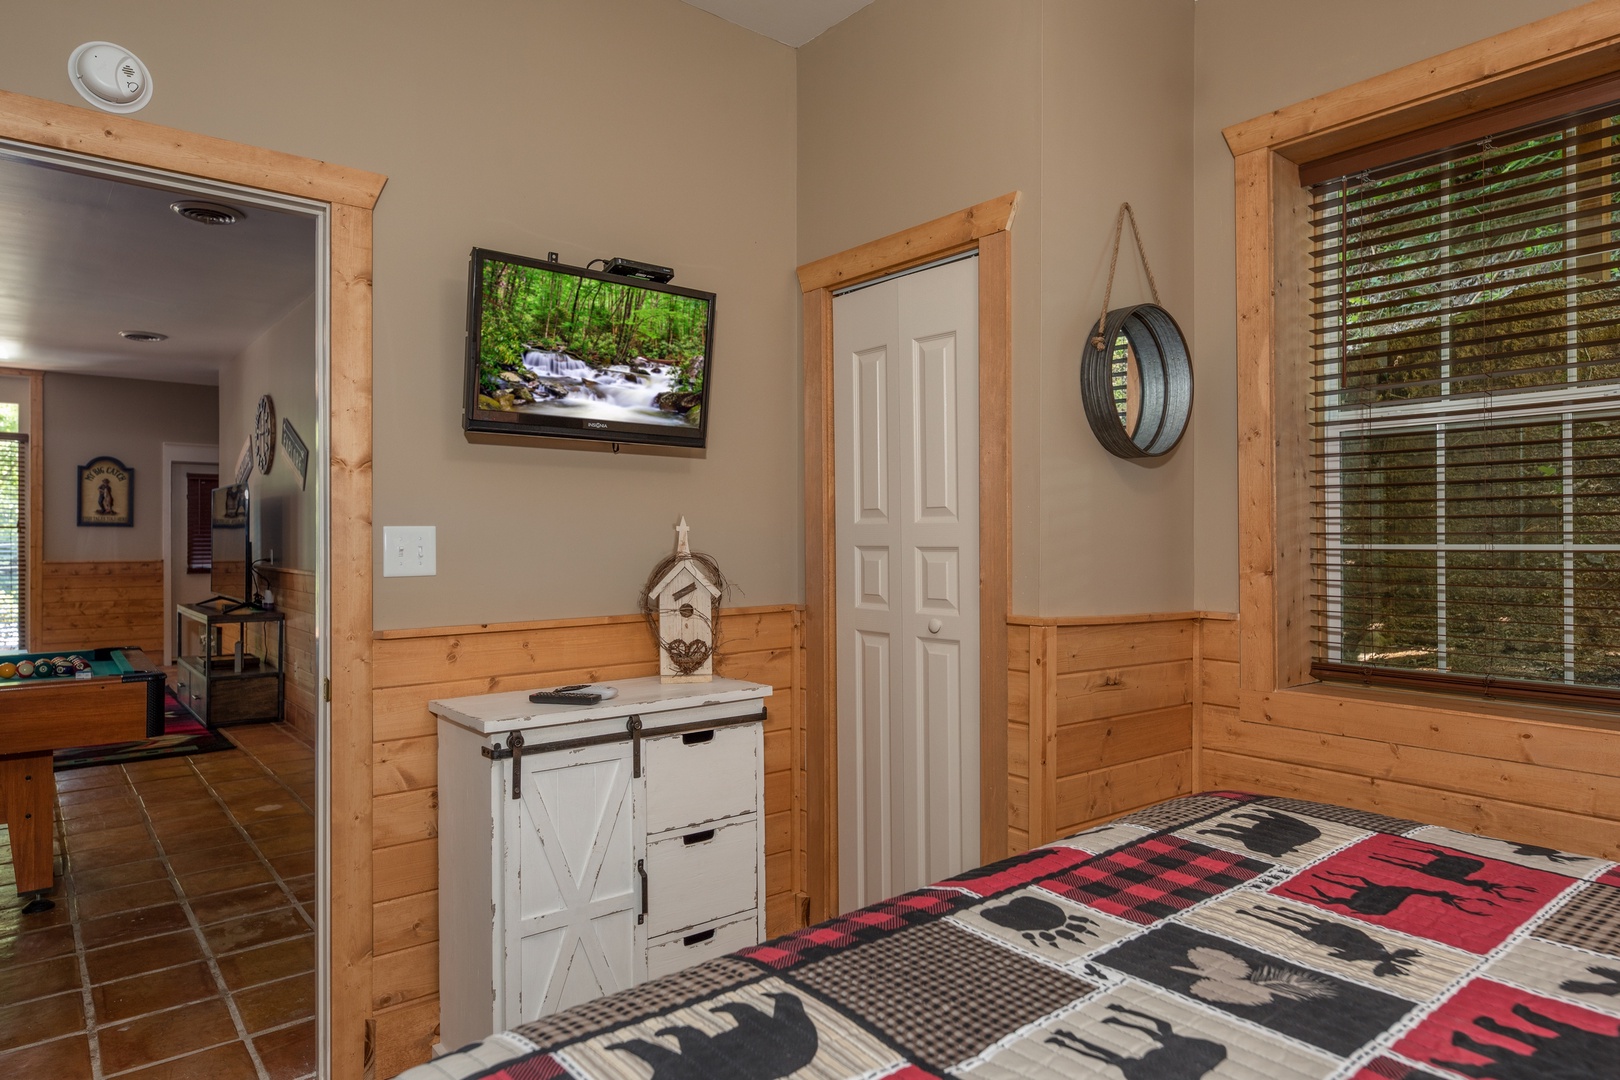 Dresser and TV in a bedroom at Hawk's Heart Lodge, a 3 bedroom cabin rental located in Pigeon Forge